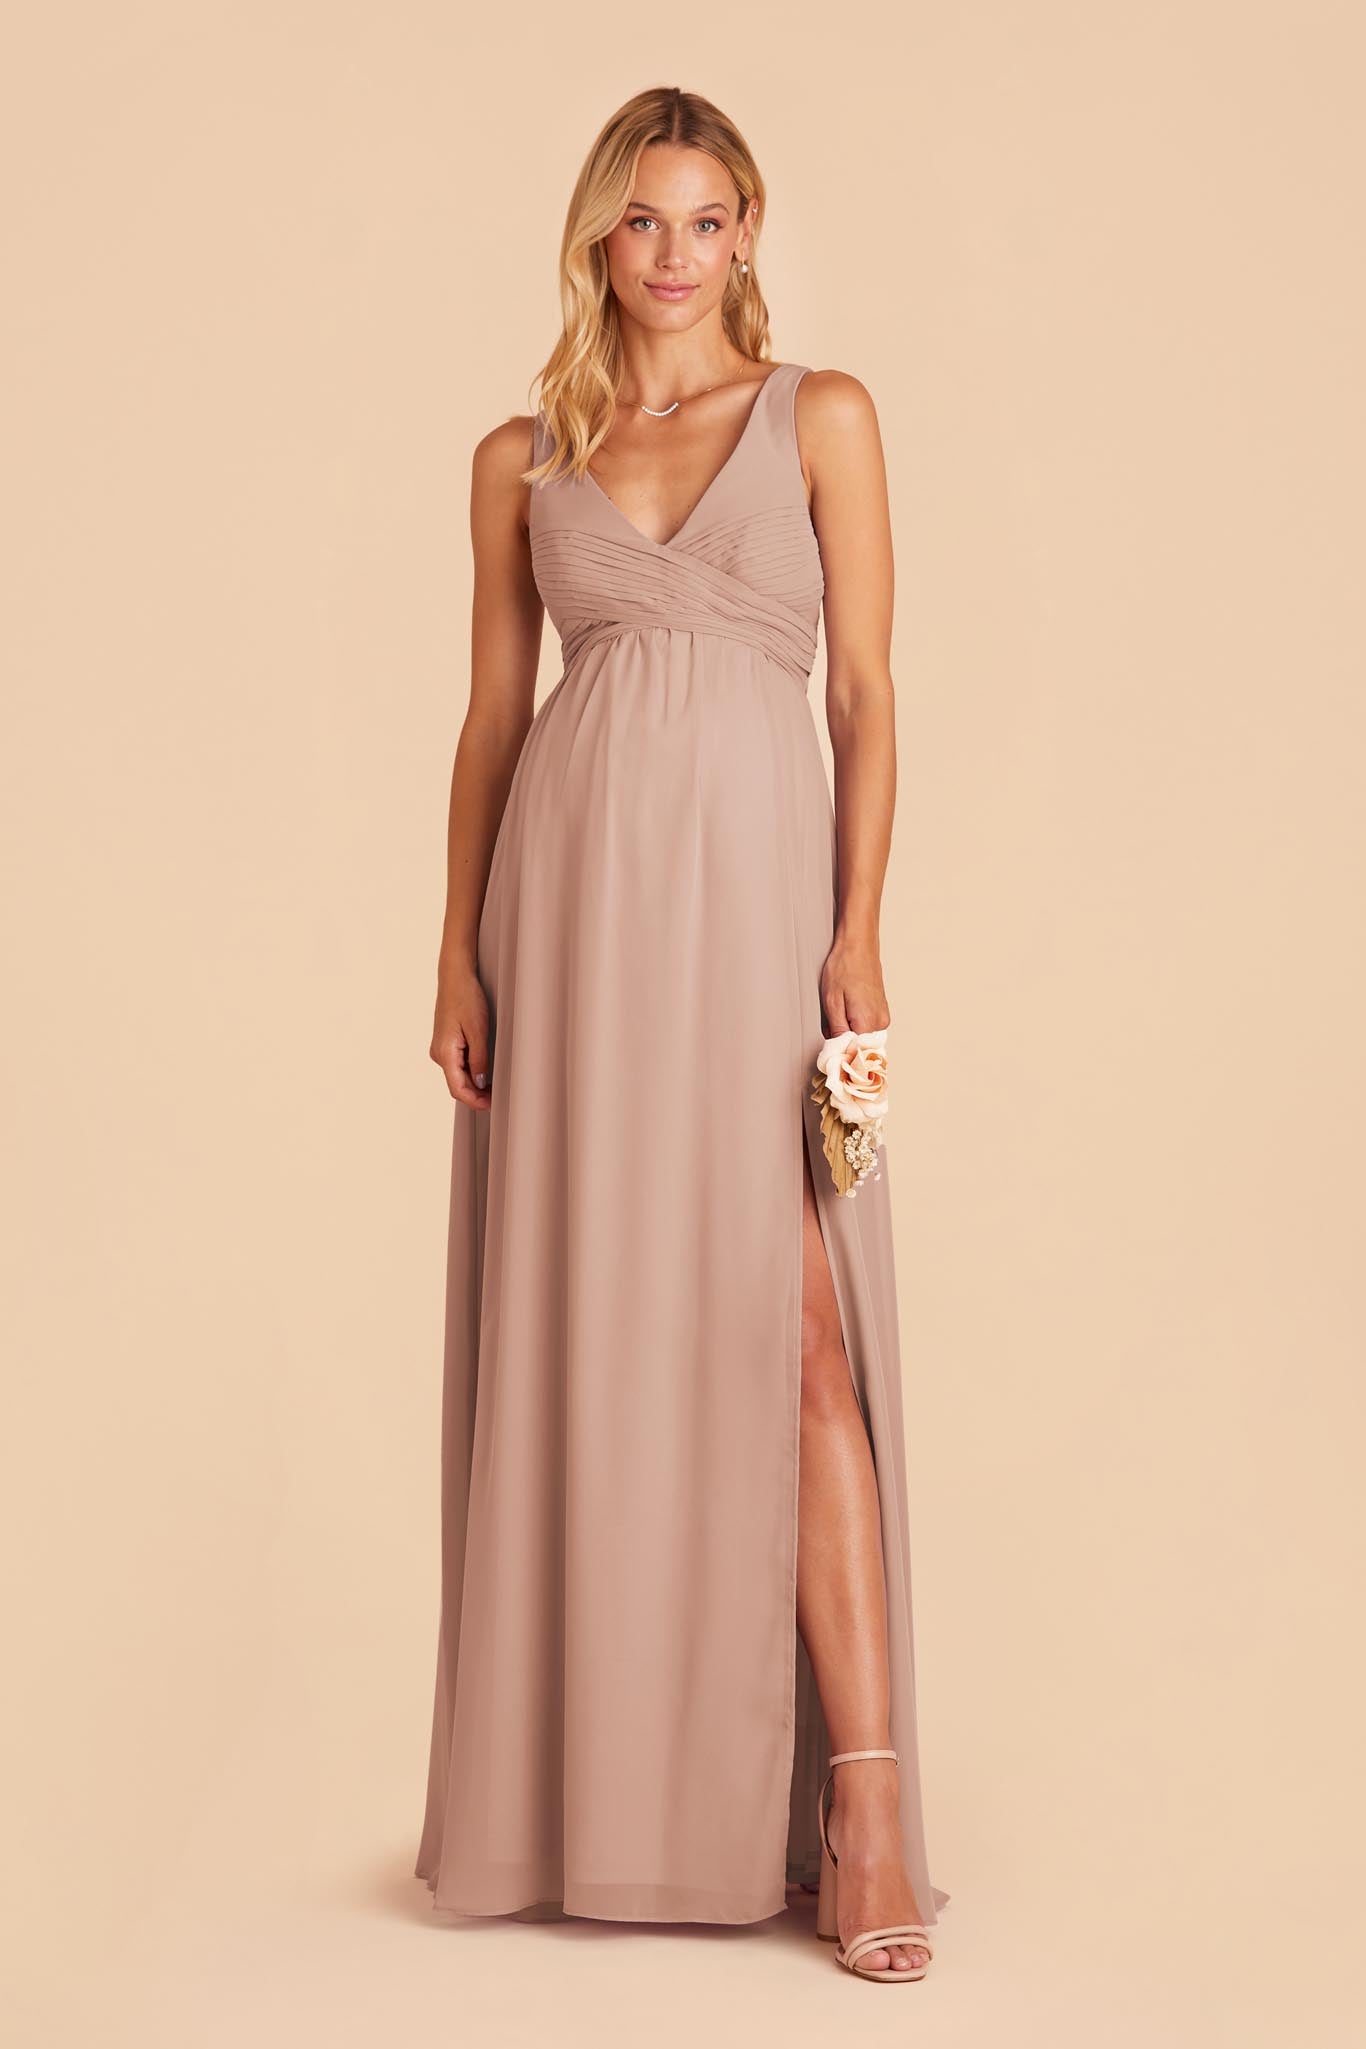 Taupe Laurie Empire Dress by Birdy Grey